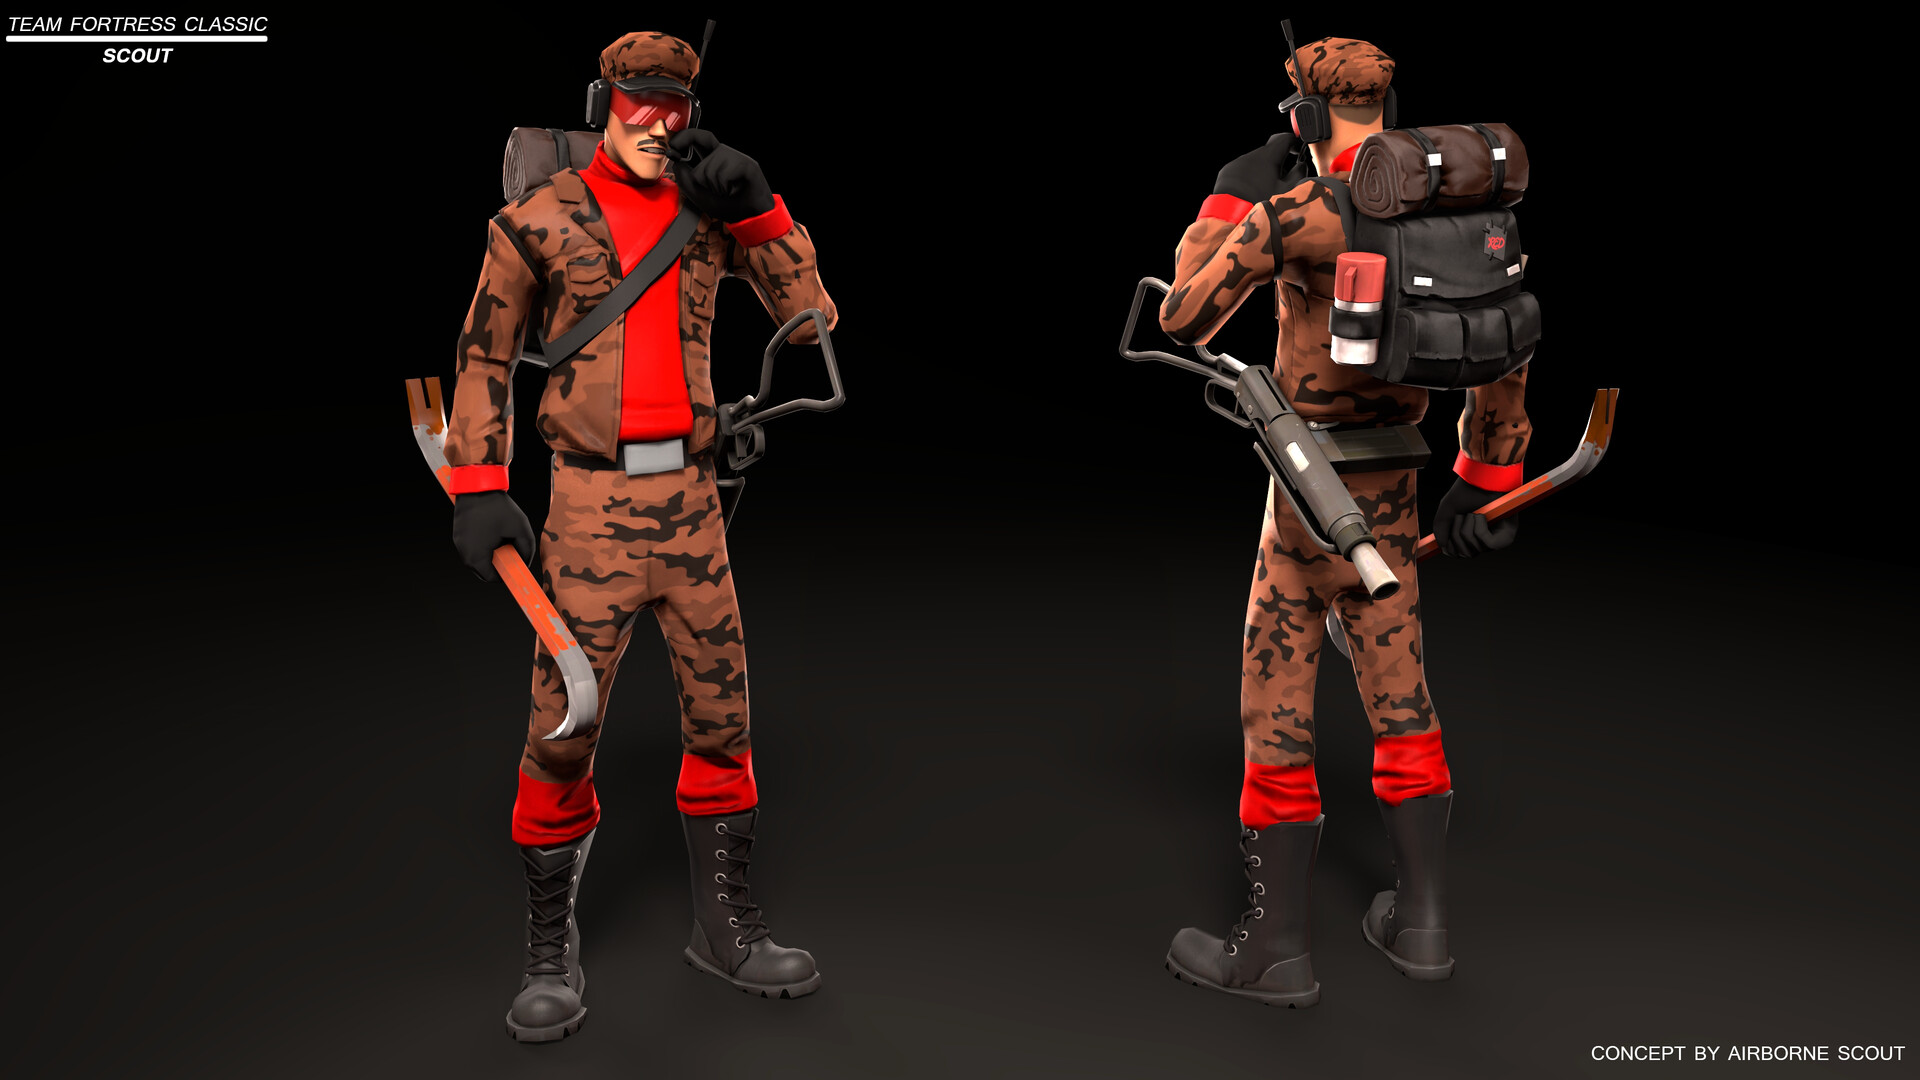 Scout - TF2 Classic Wiki